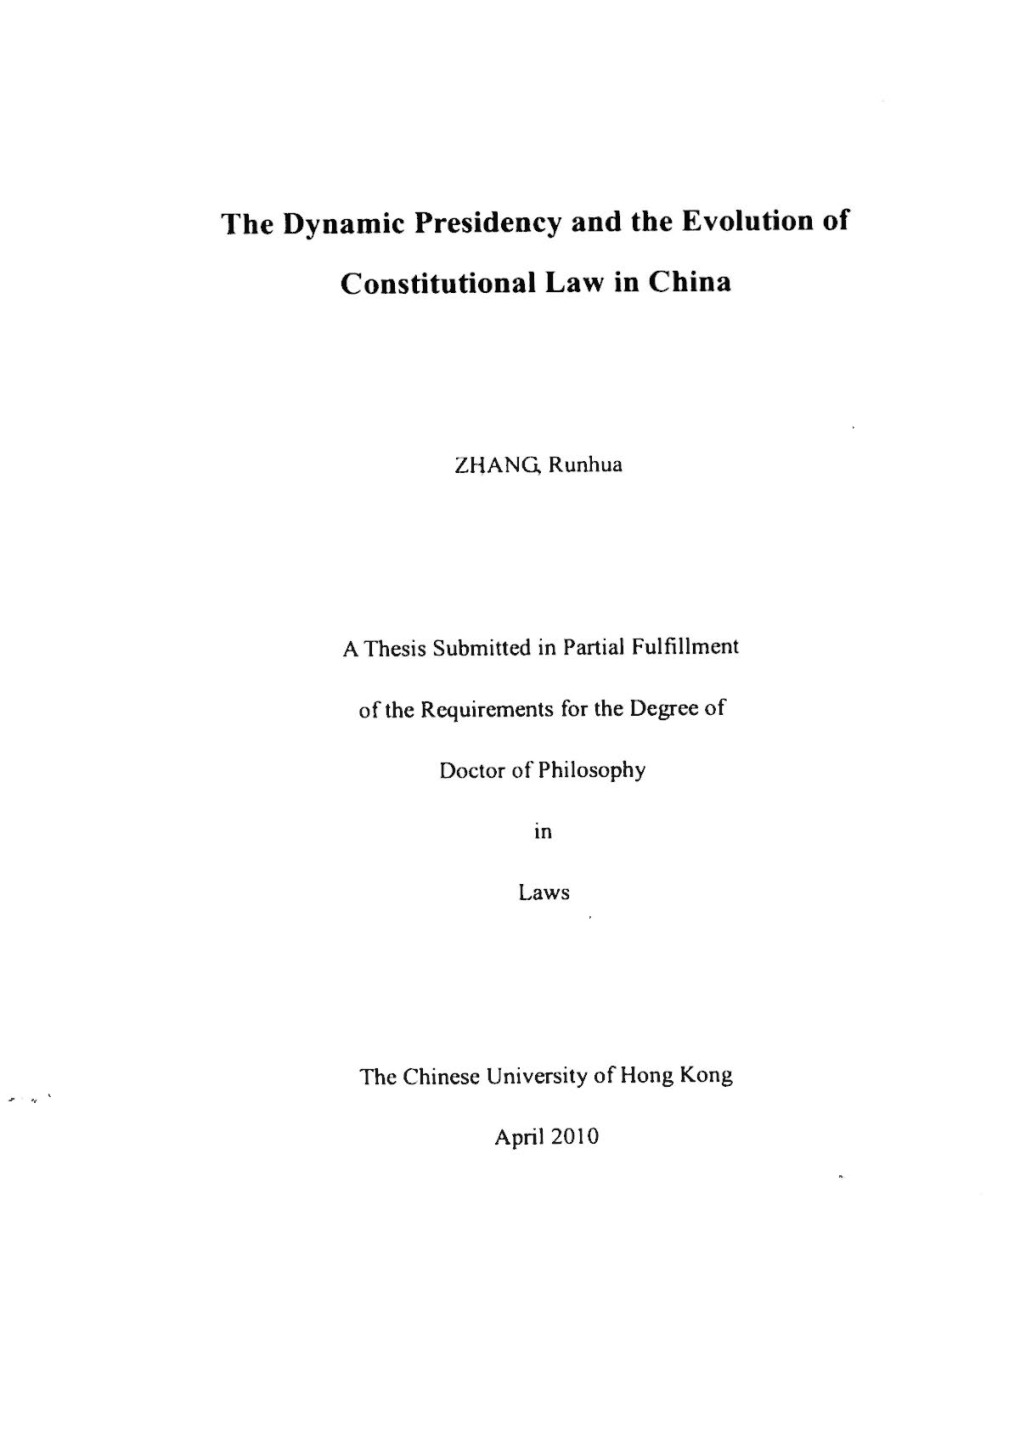 The Dynamic Presidency and the Evolution of Constitutional Law in China